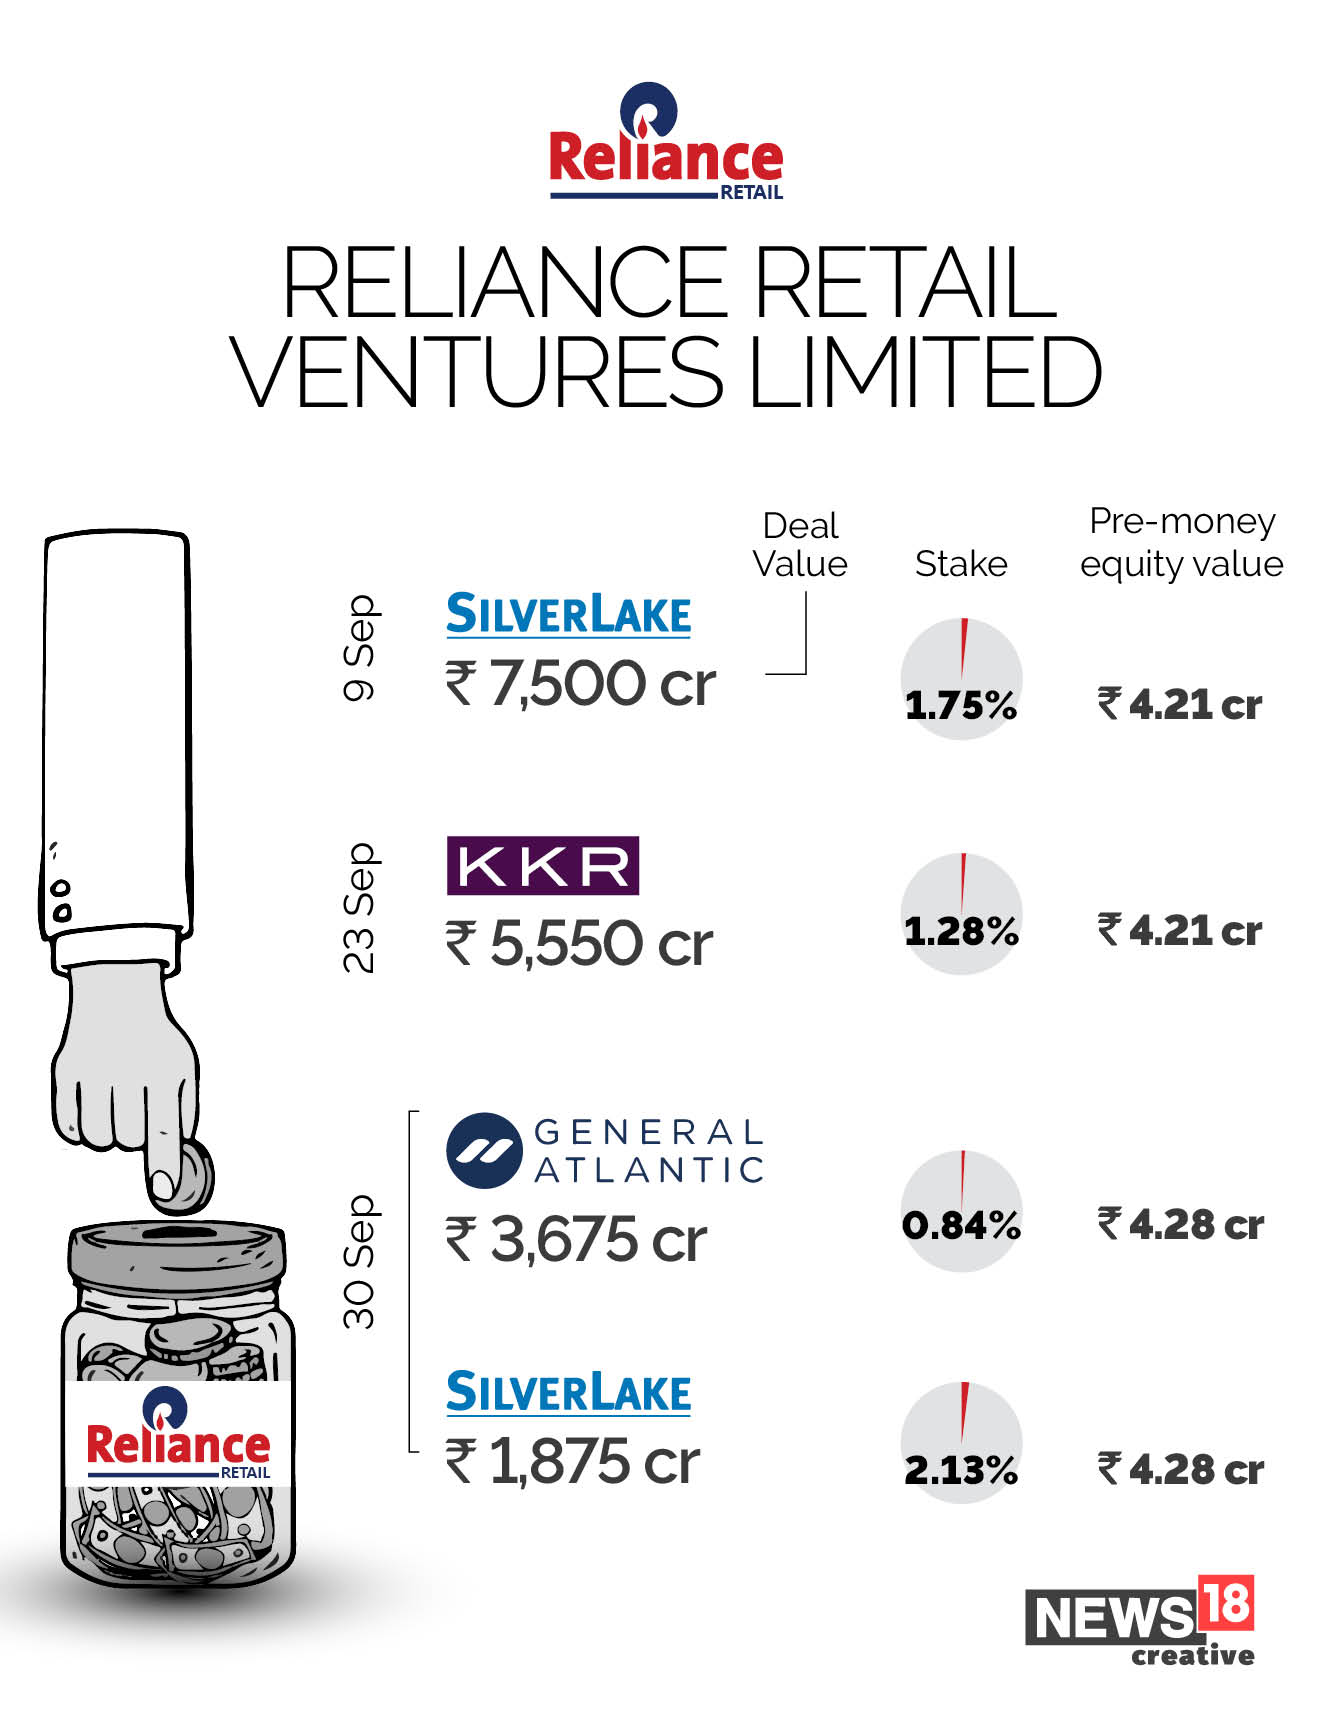 News by Numbers: Reliance's fourth deal in three weeks